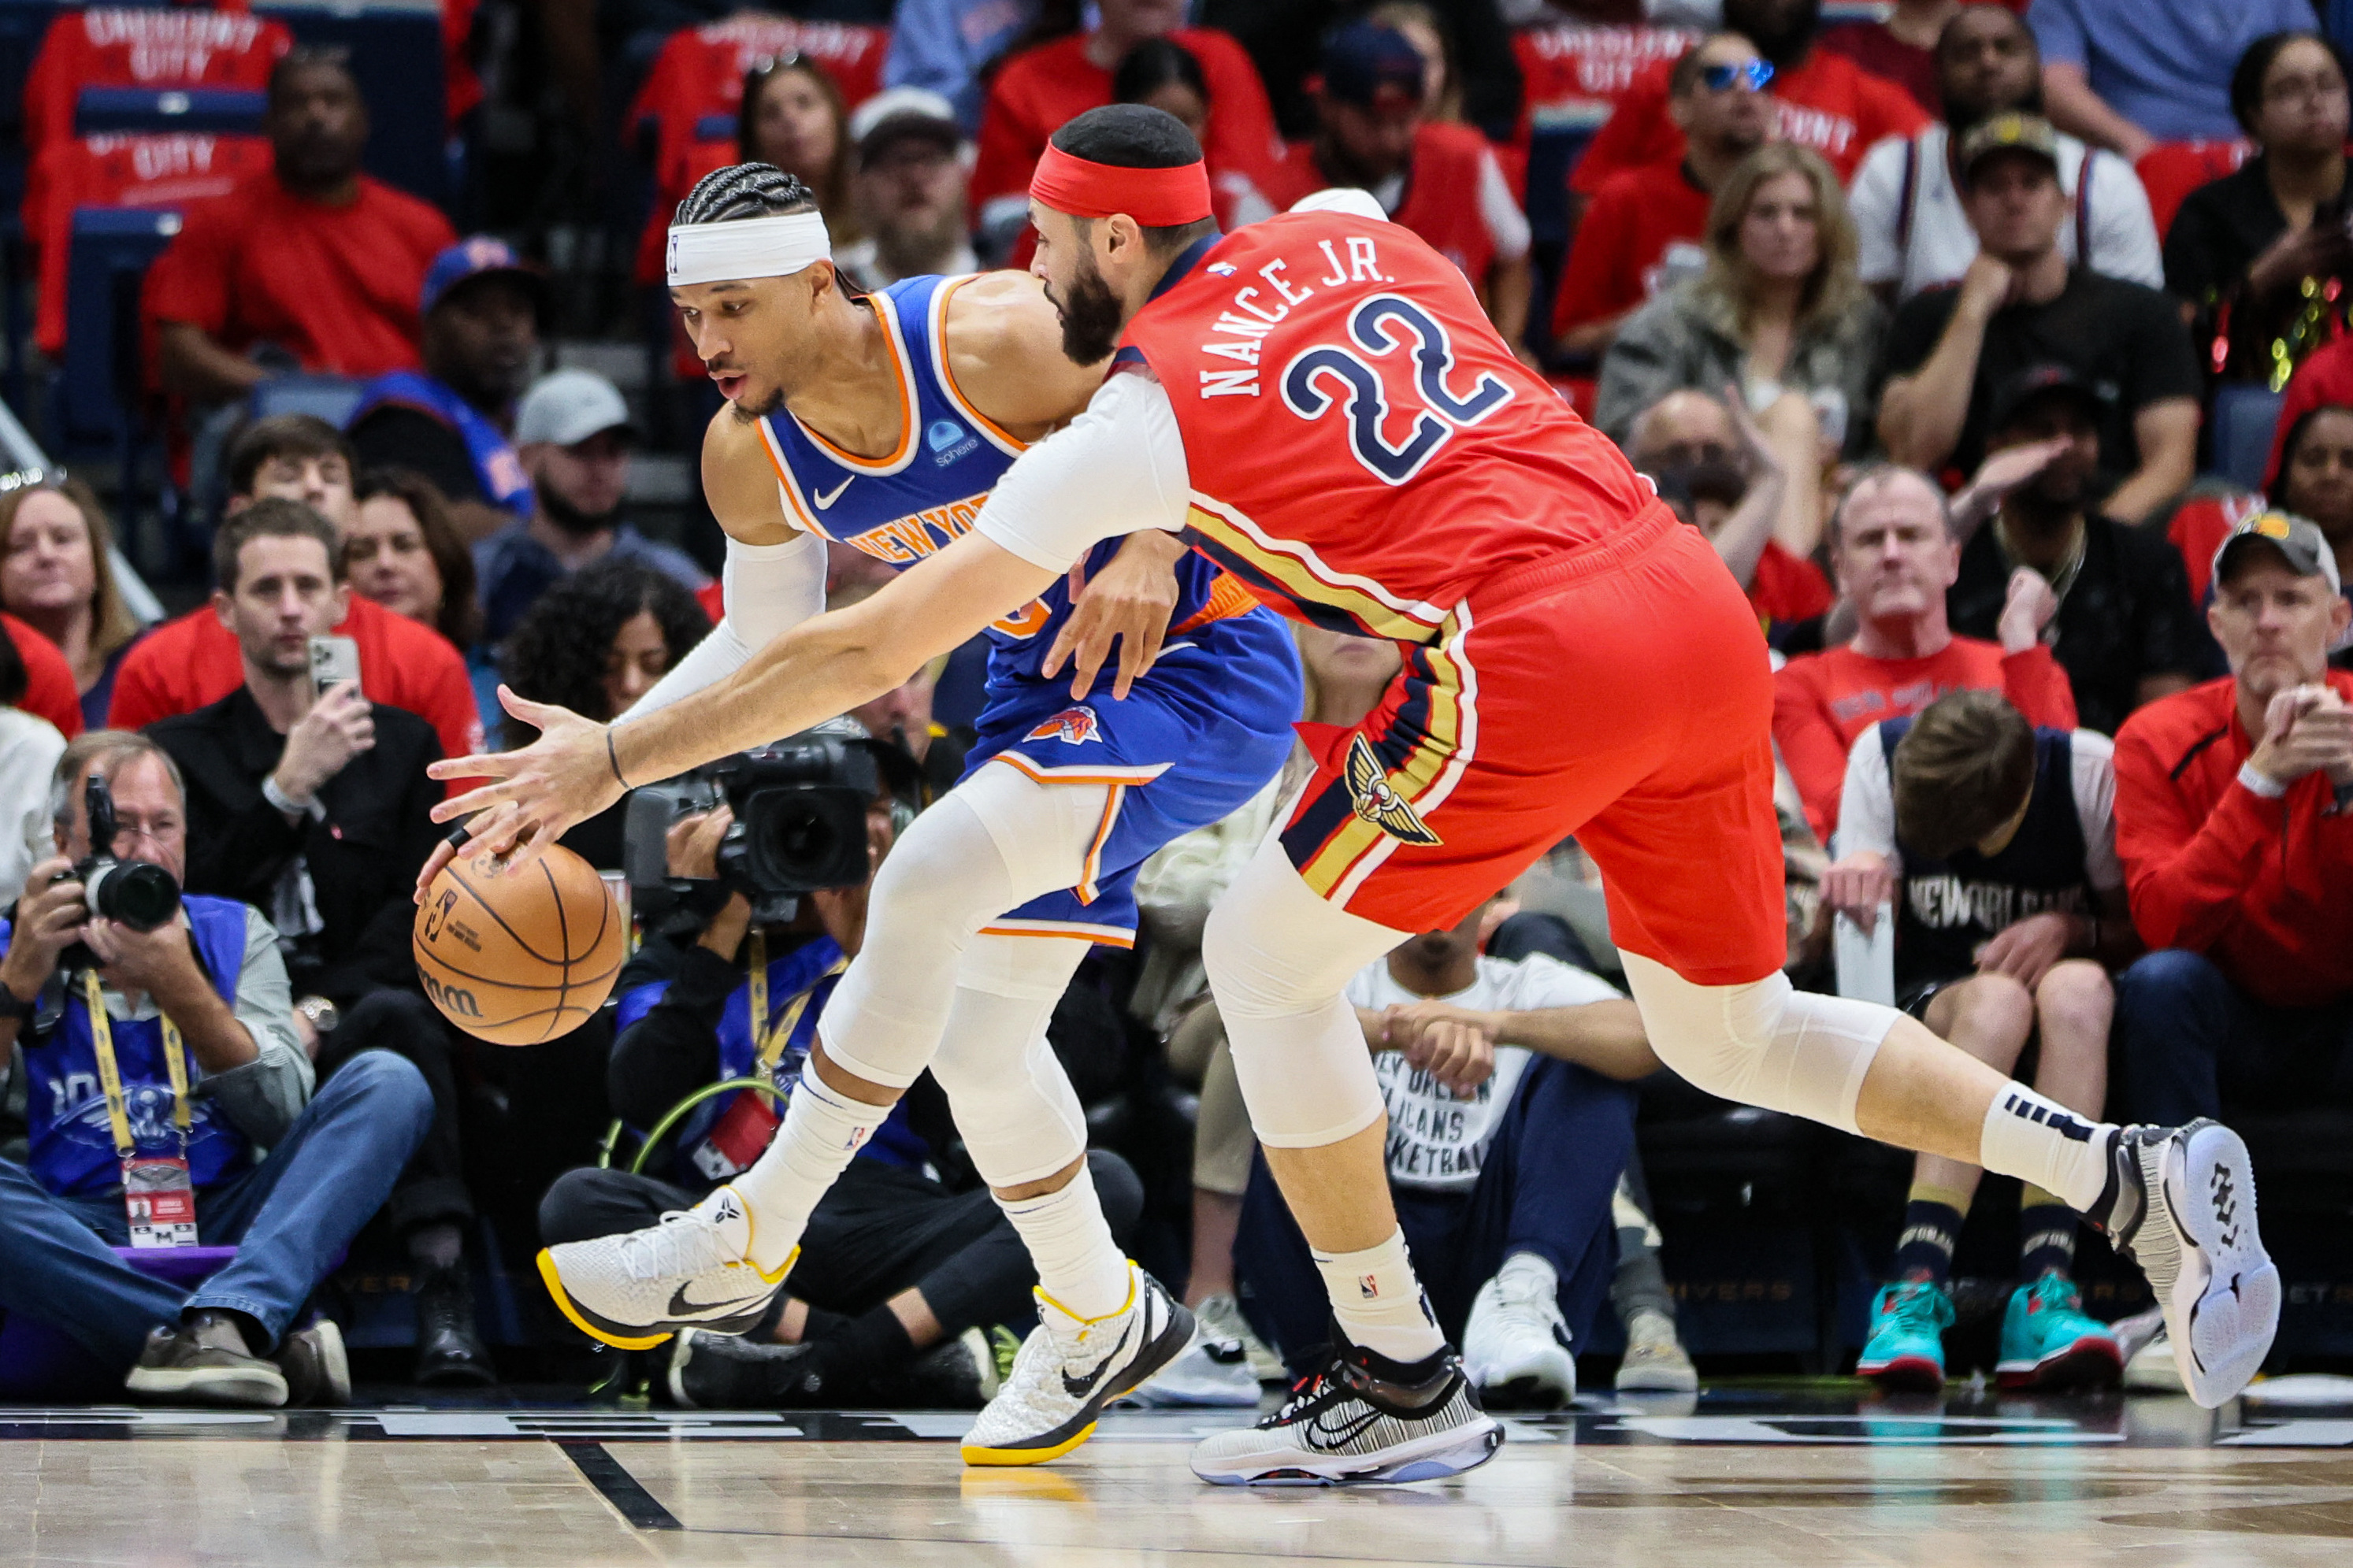 Pelicans prevail in home opener, overwhelm Knicks | Reuters